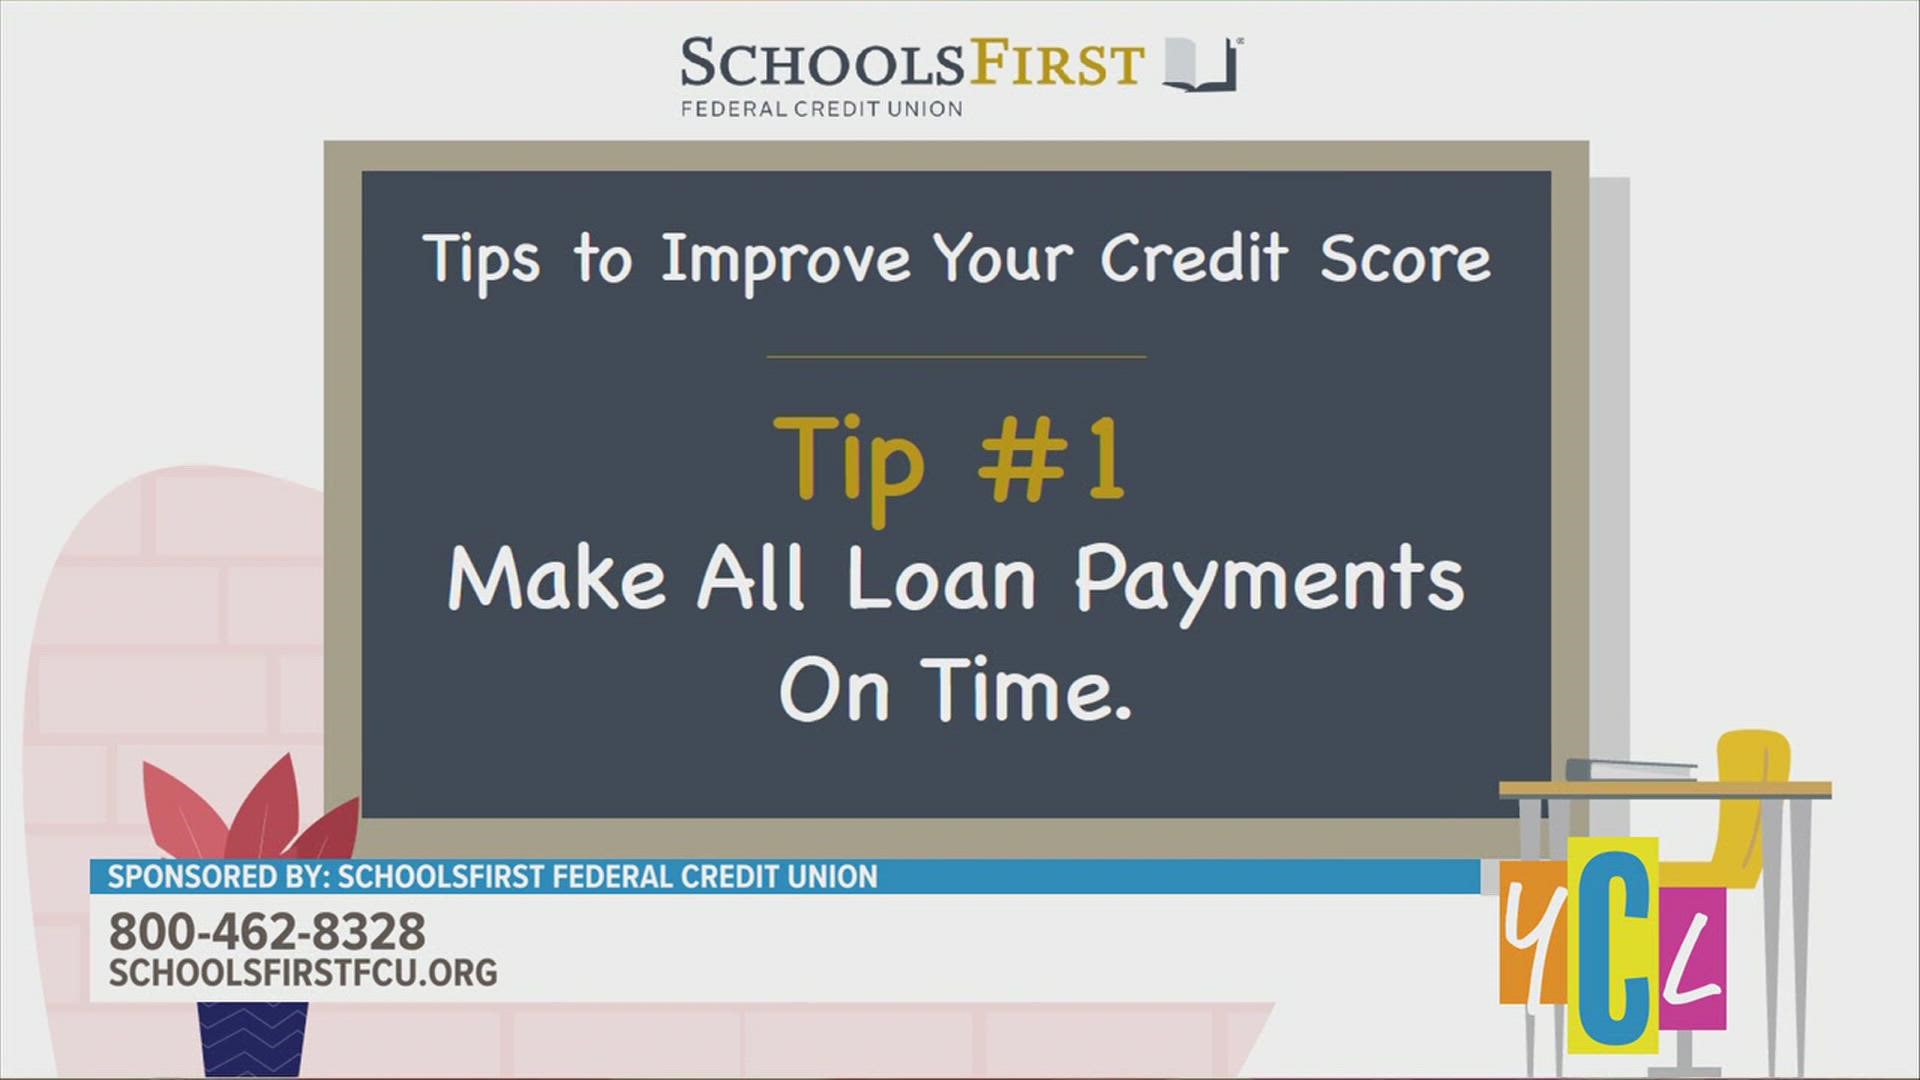 Many consumers are in the midst of financial challenges and are concerned about maintaining a good credit score. This segment paid for by SchoolsFirst FCU.